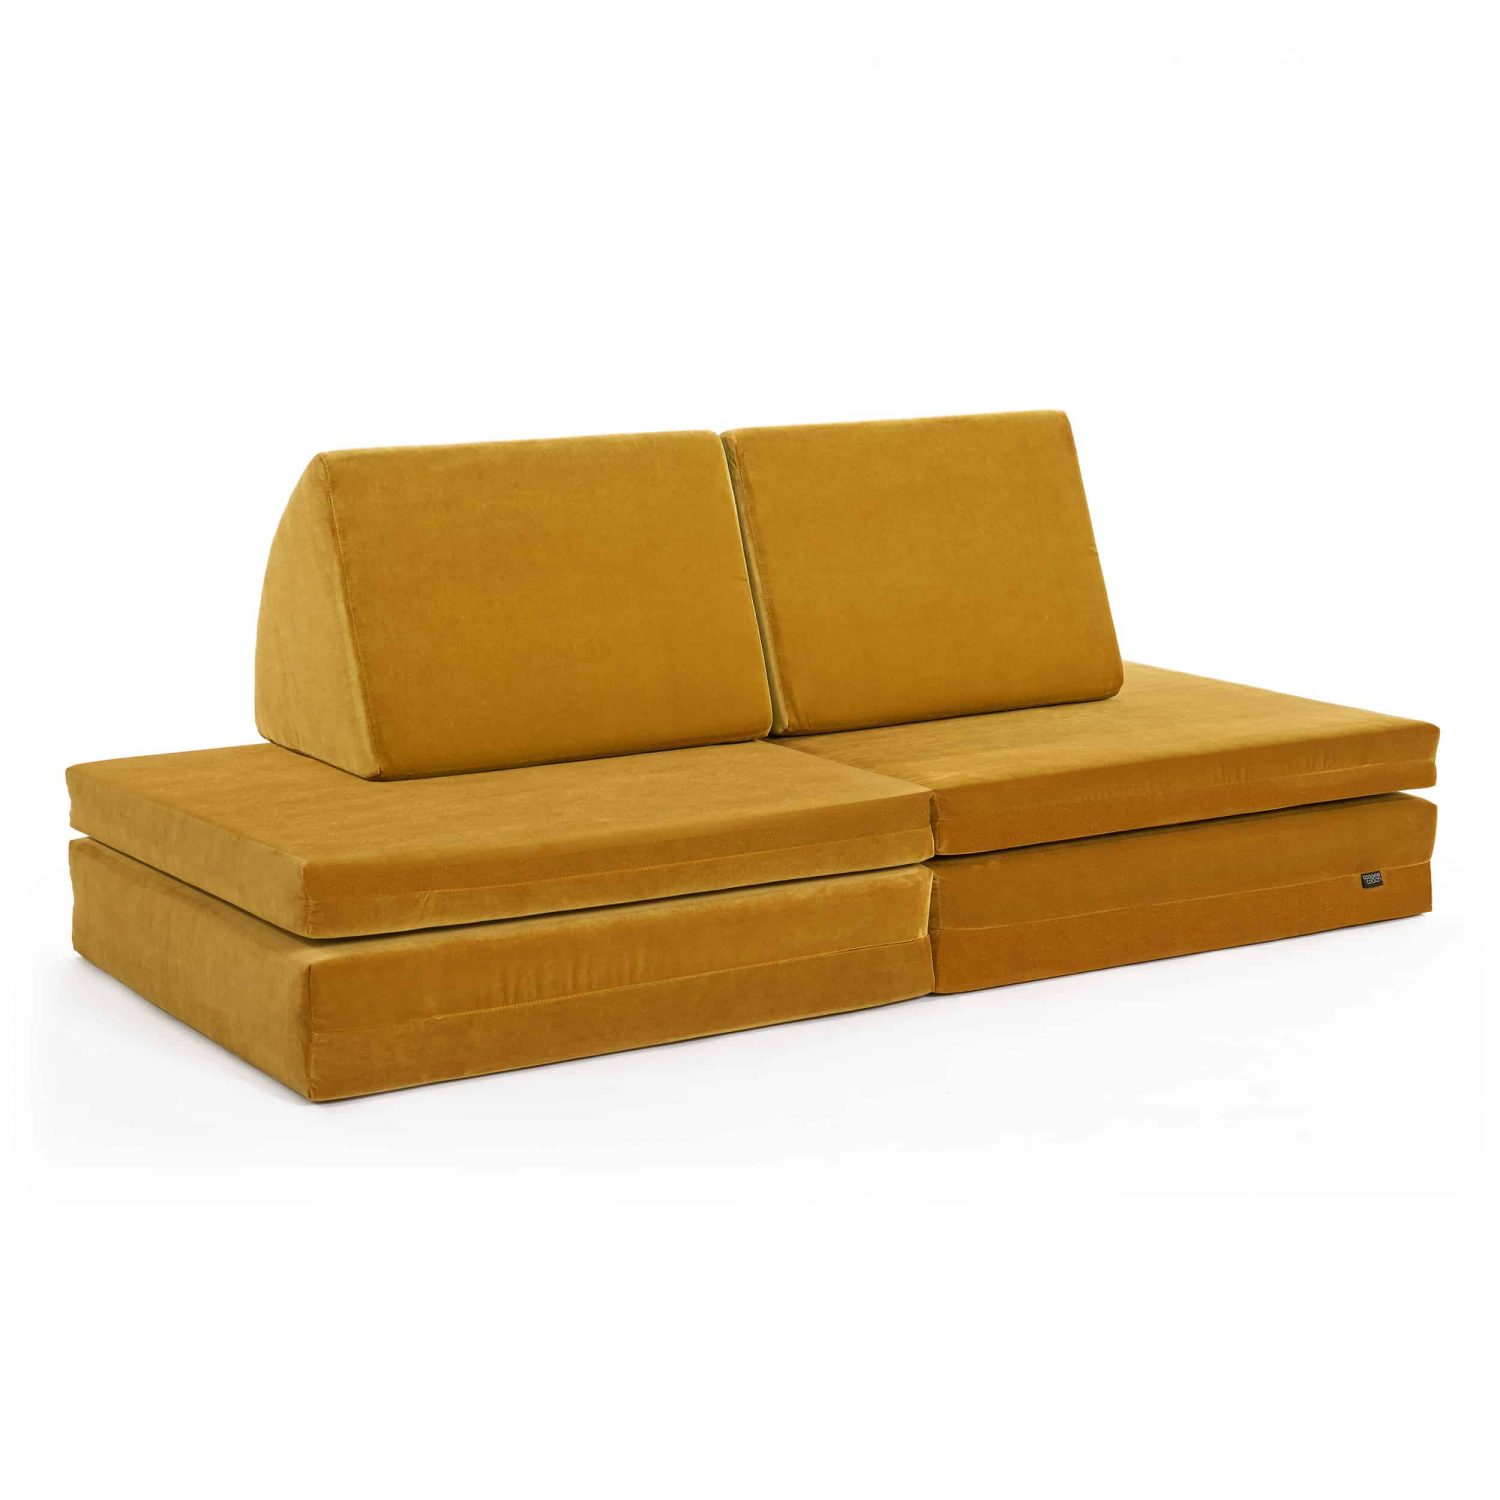 coogeecouch | Kindersofa | Serie: tesoro-de-oro | Farbe: amber-gold gold | Ansicht: Front schräg | made in Germany